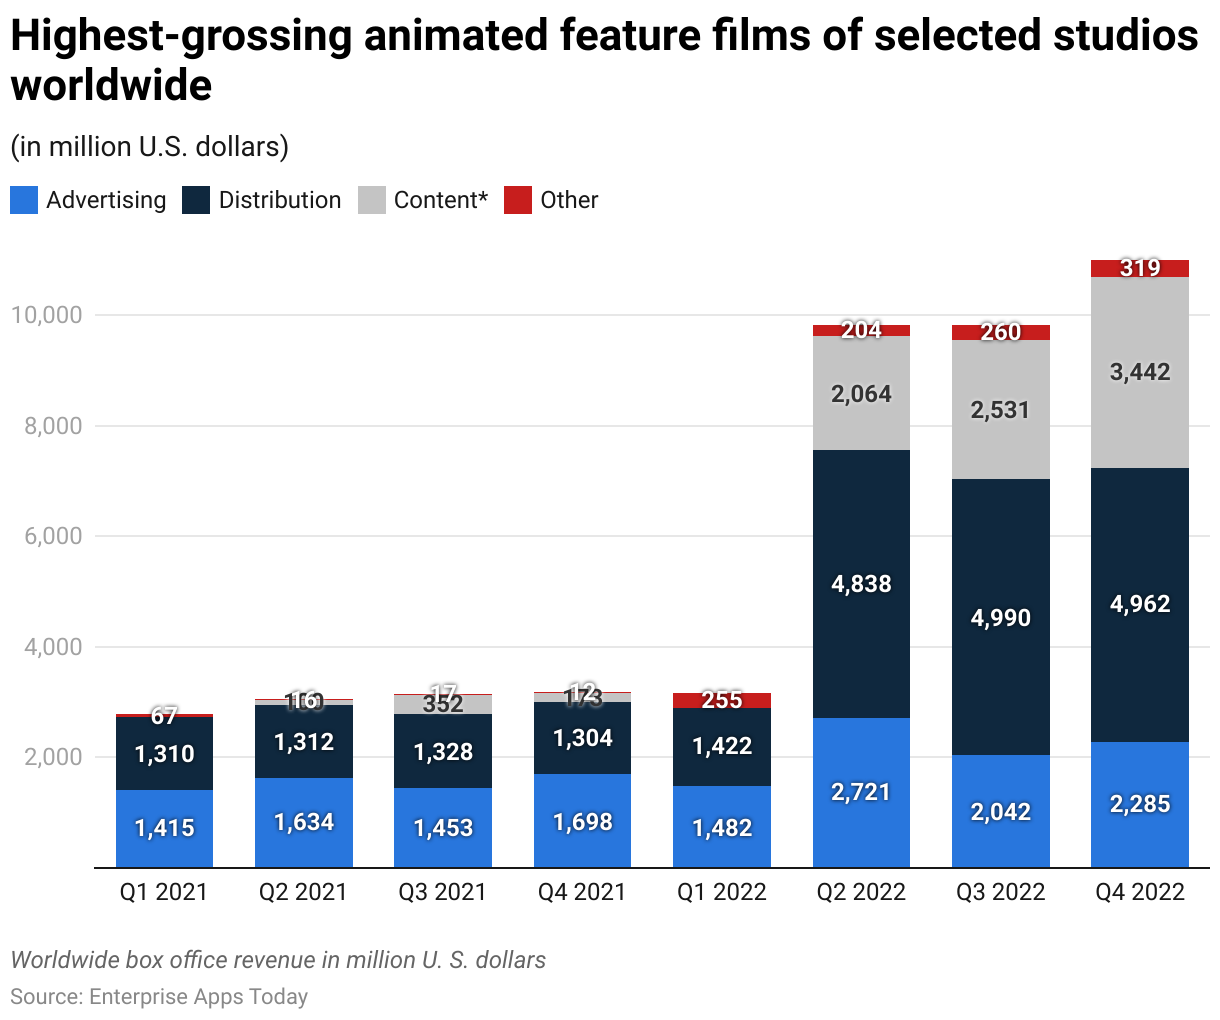 Highest-grossing animated feature films of selected studios worldwide
